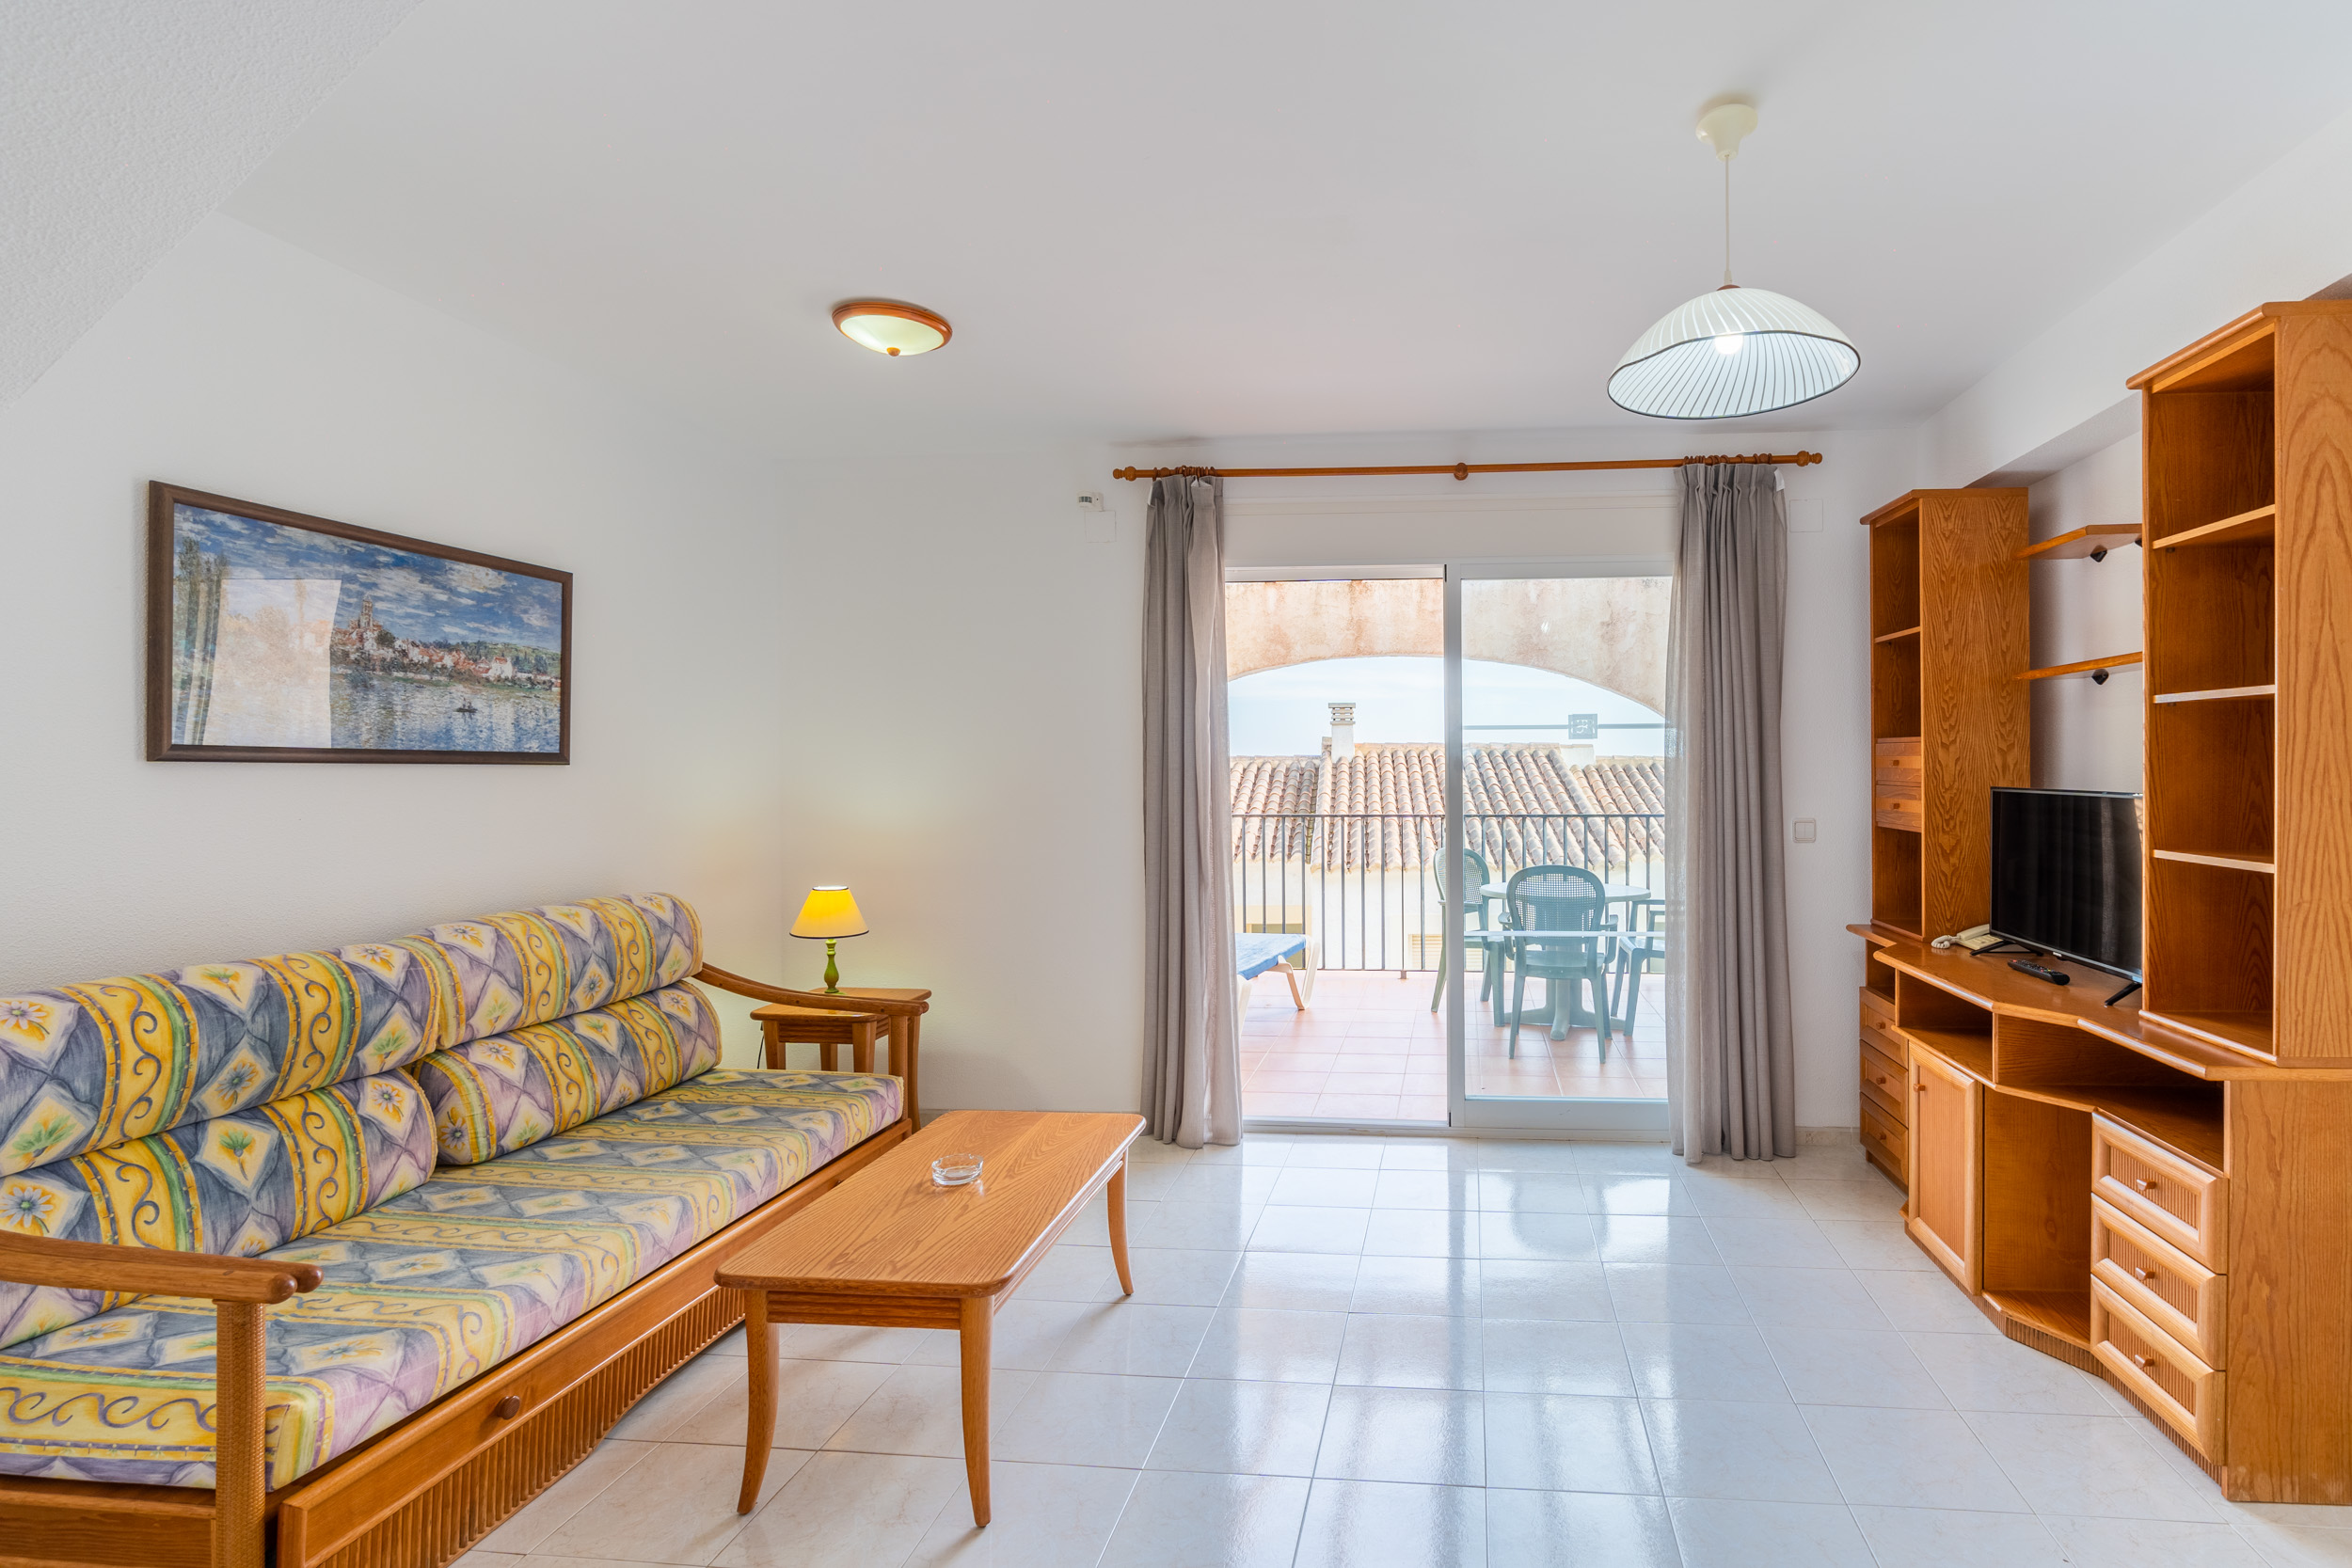 OPPORTUNITY!! APARTMENT FOR SALE WITH PANORAMIC SEA VIEWS IN CALPE